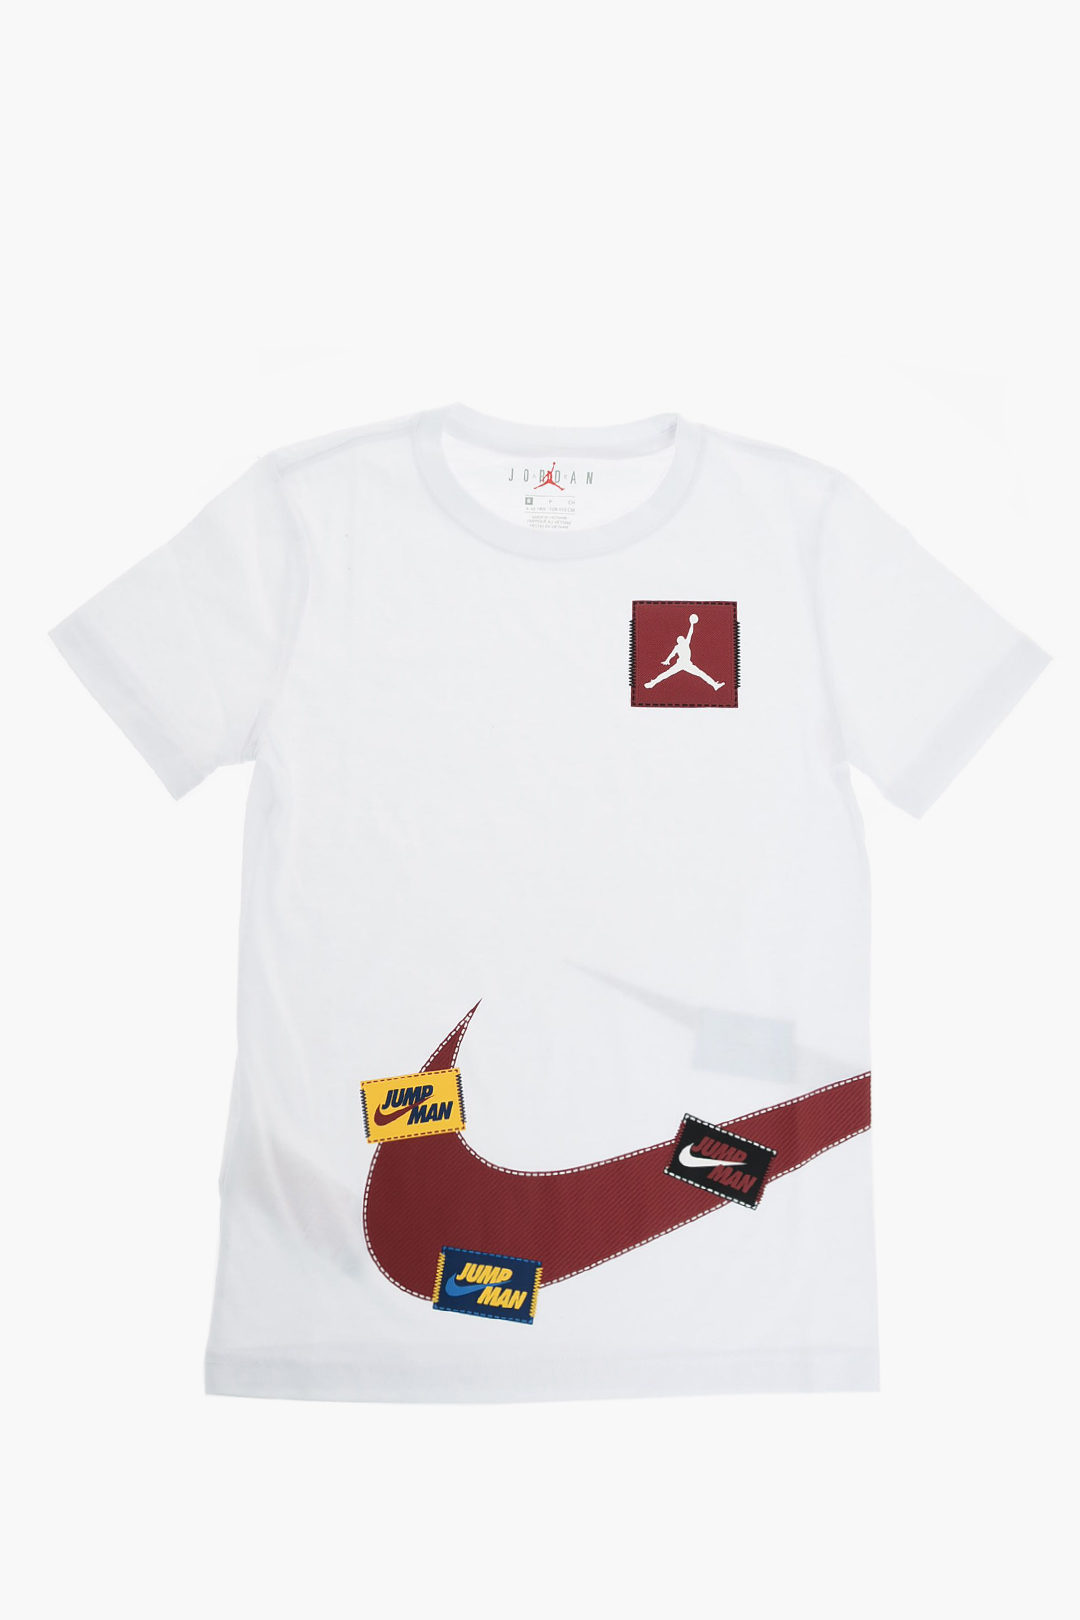 Nike KIDS AIR JORDAN T-shirt with Patches boys - Glamood Outlet